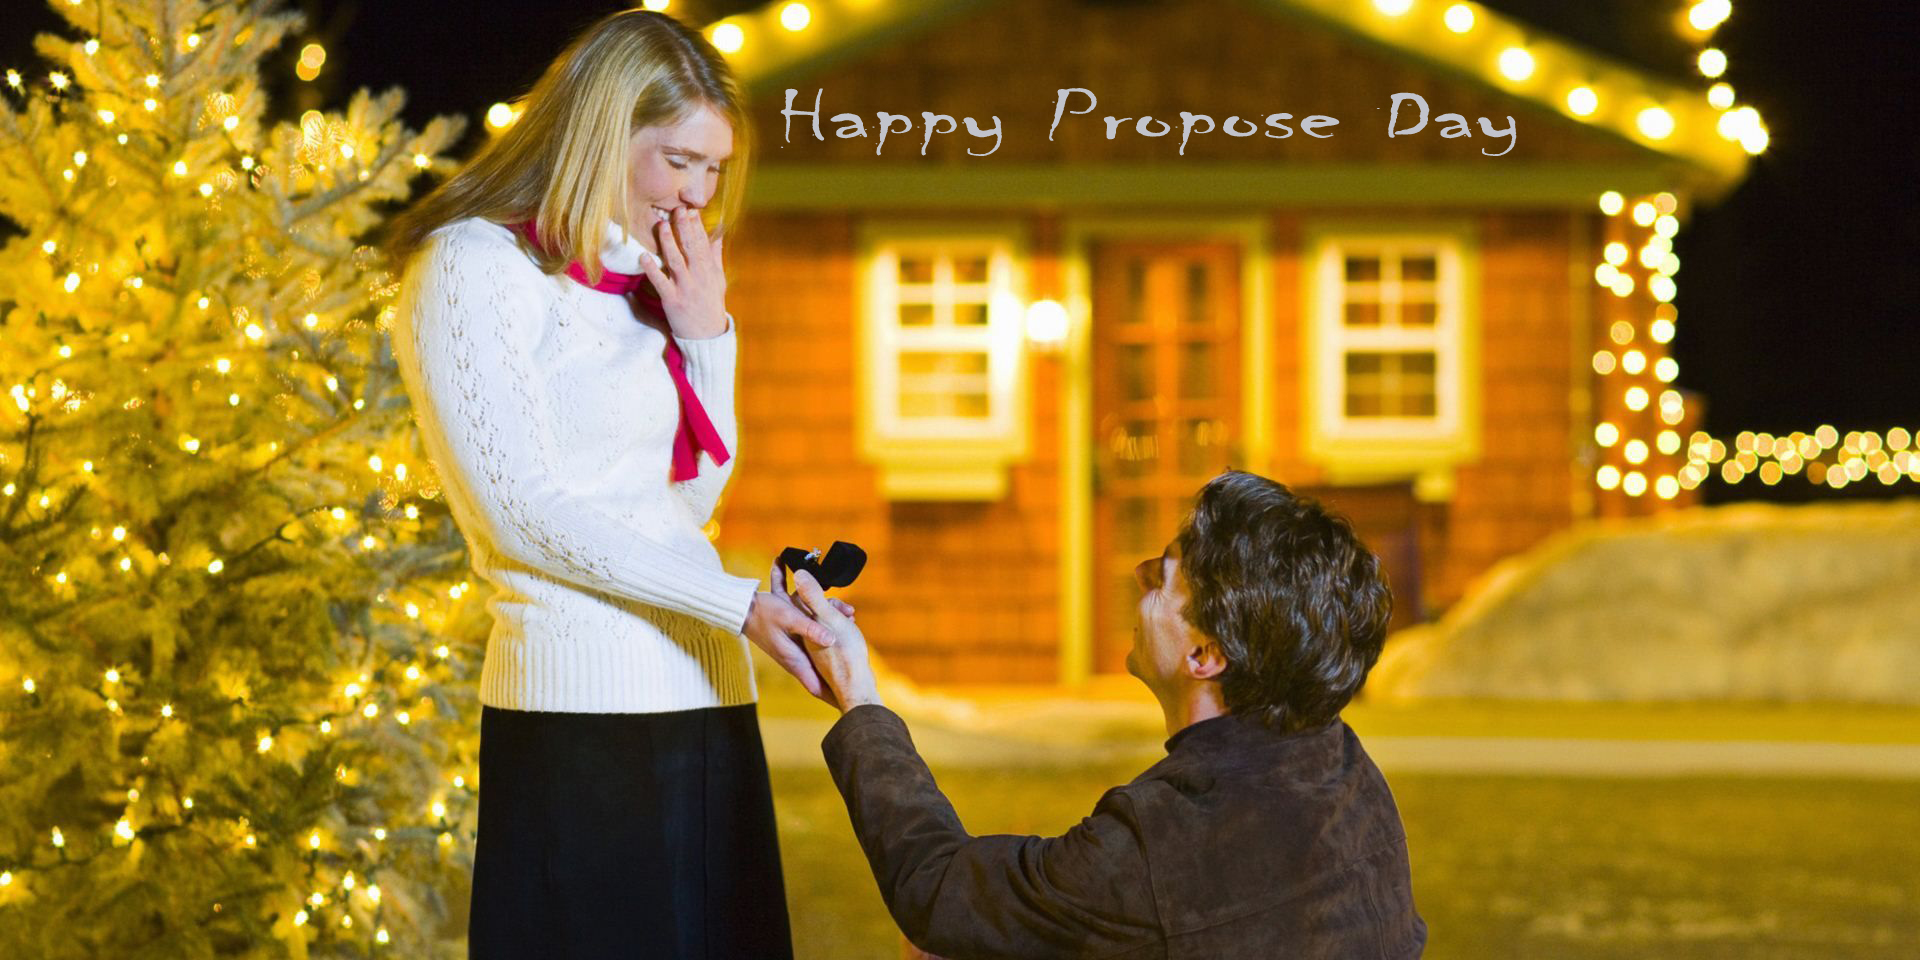 Wallpaper Happy Propose Day High Quality Categoris